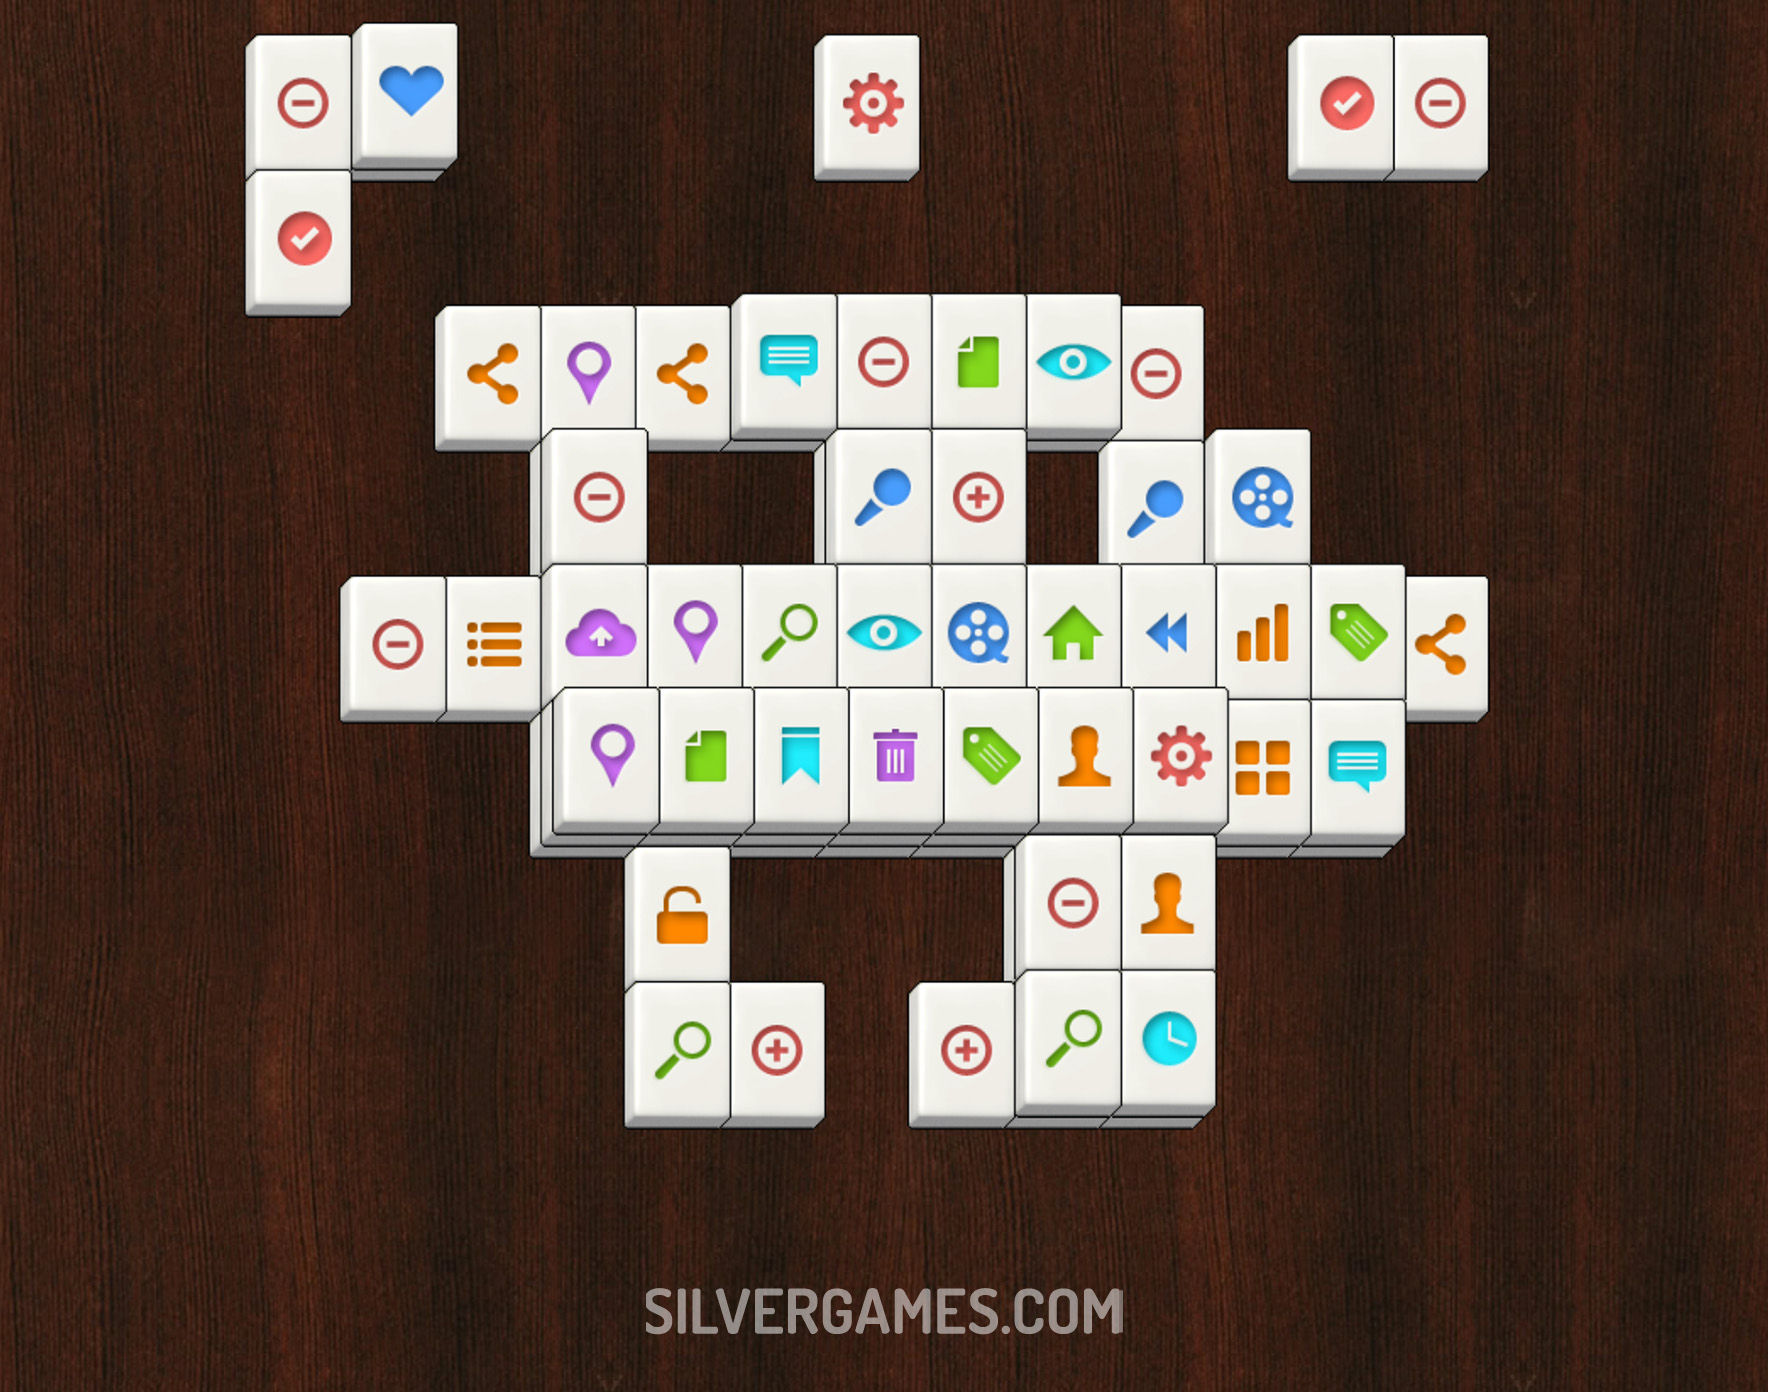 Mahjong Solitaire  Instantly Play Mahjong Solitaire Free Online Now